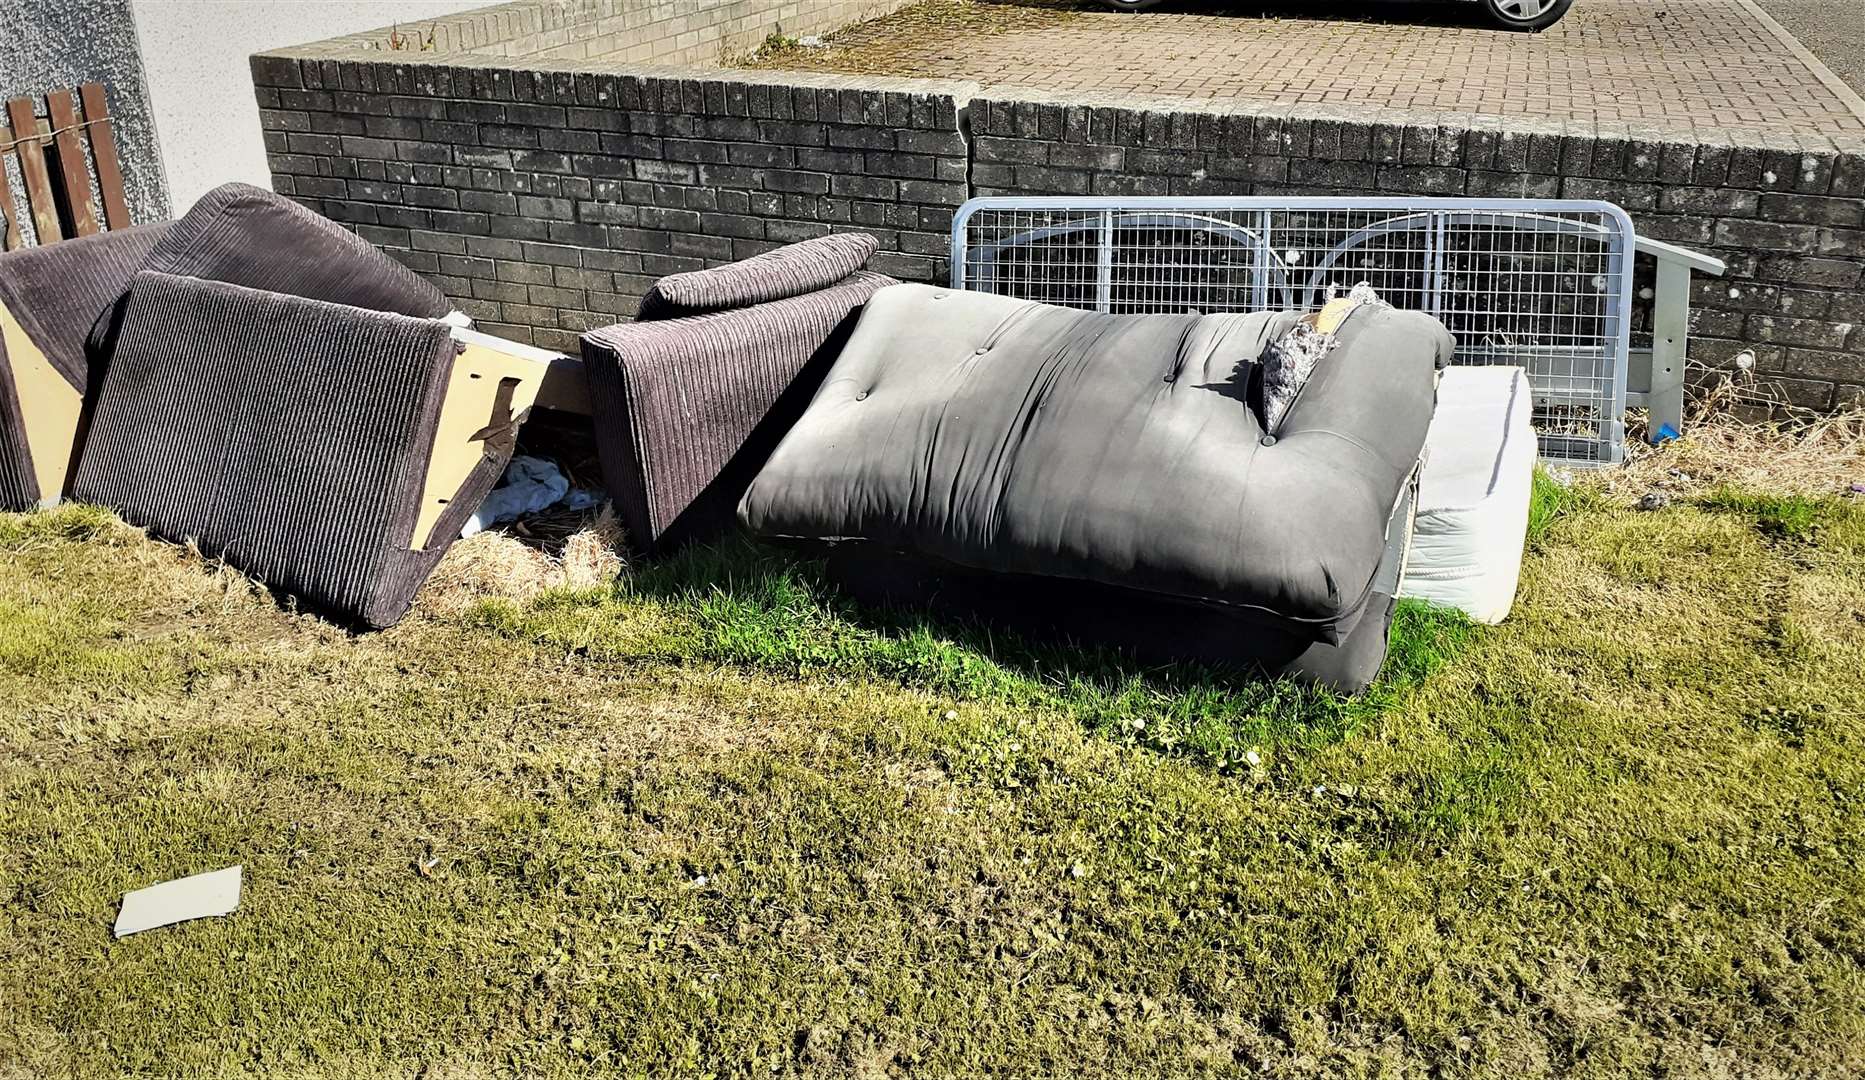 Bulky items that have lain in the Towerhill Road area of Thurso for 'upward of two months' according to community activist Alexander Glasgow. Picture: Alex Glasgow